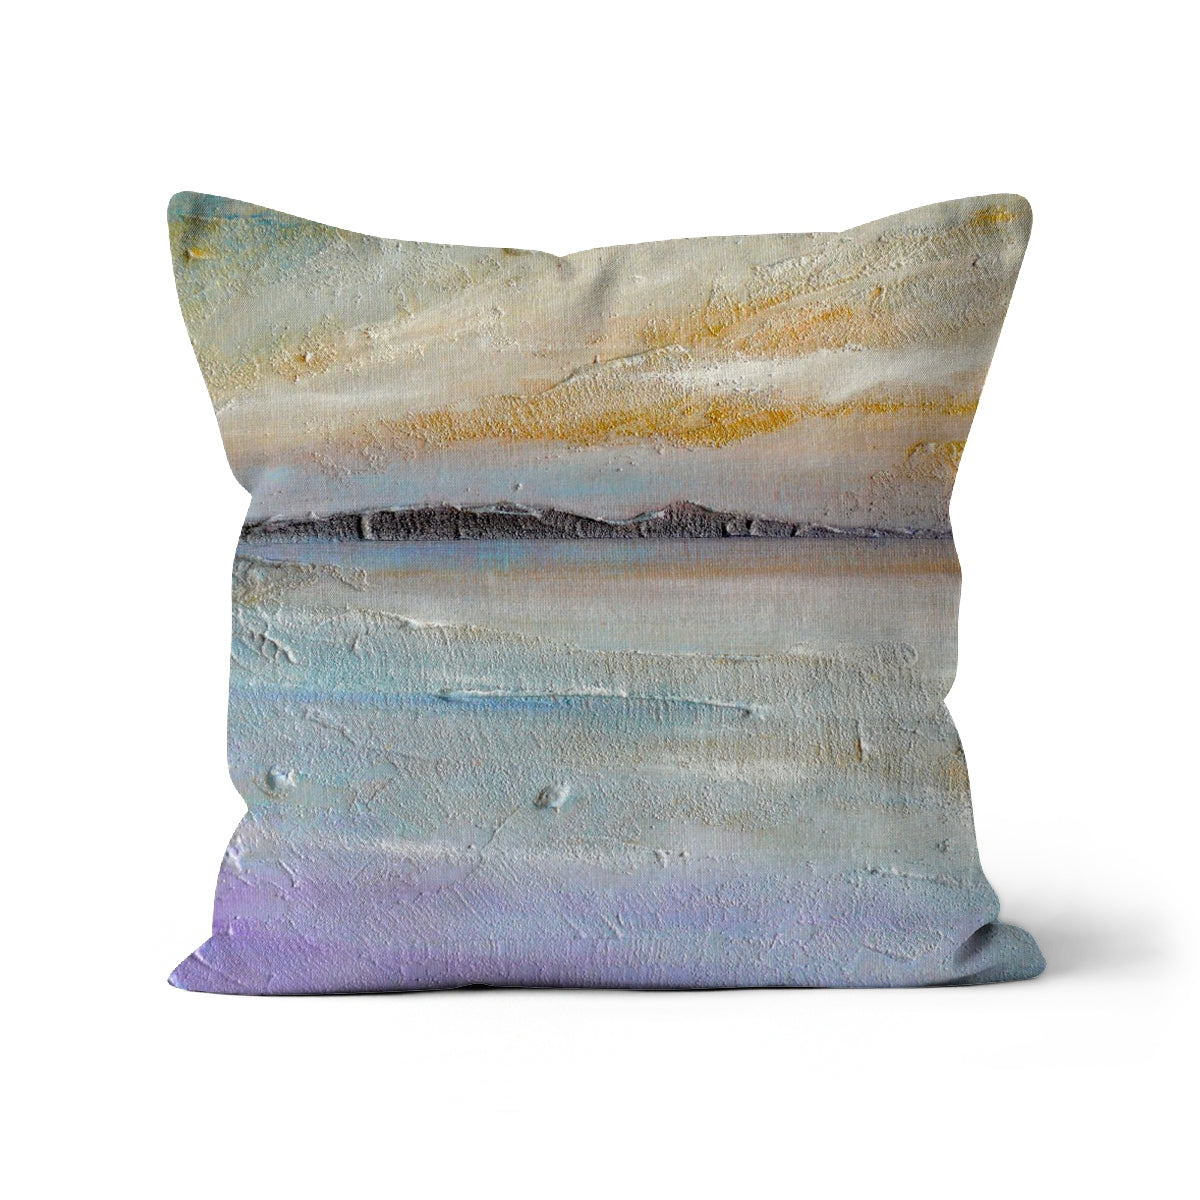 Sollas Beach North Uist Art Gifts Cushion-Cushions-Hebridean Islands Art Gallery-Linen-12"x12"-Paintings, Prints, Homeware, Art Gifts From Scotland By Scottish Artist Kevin Hunter